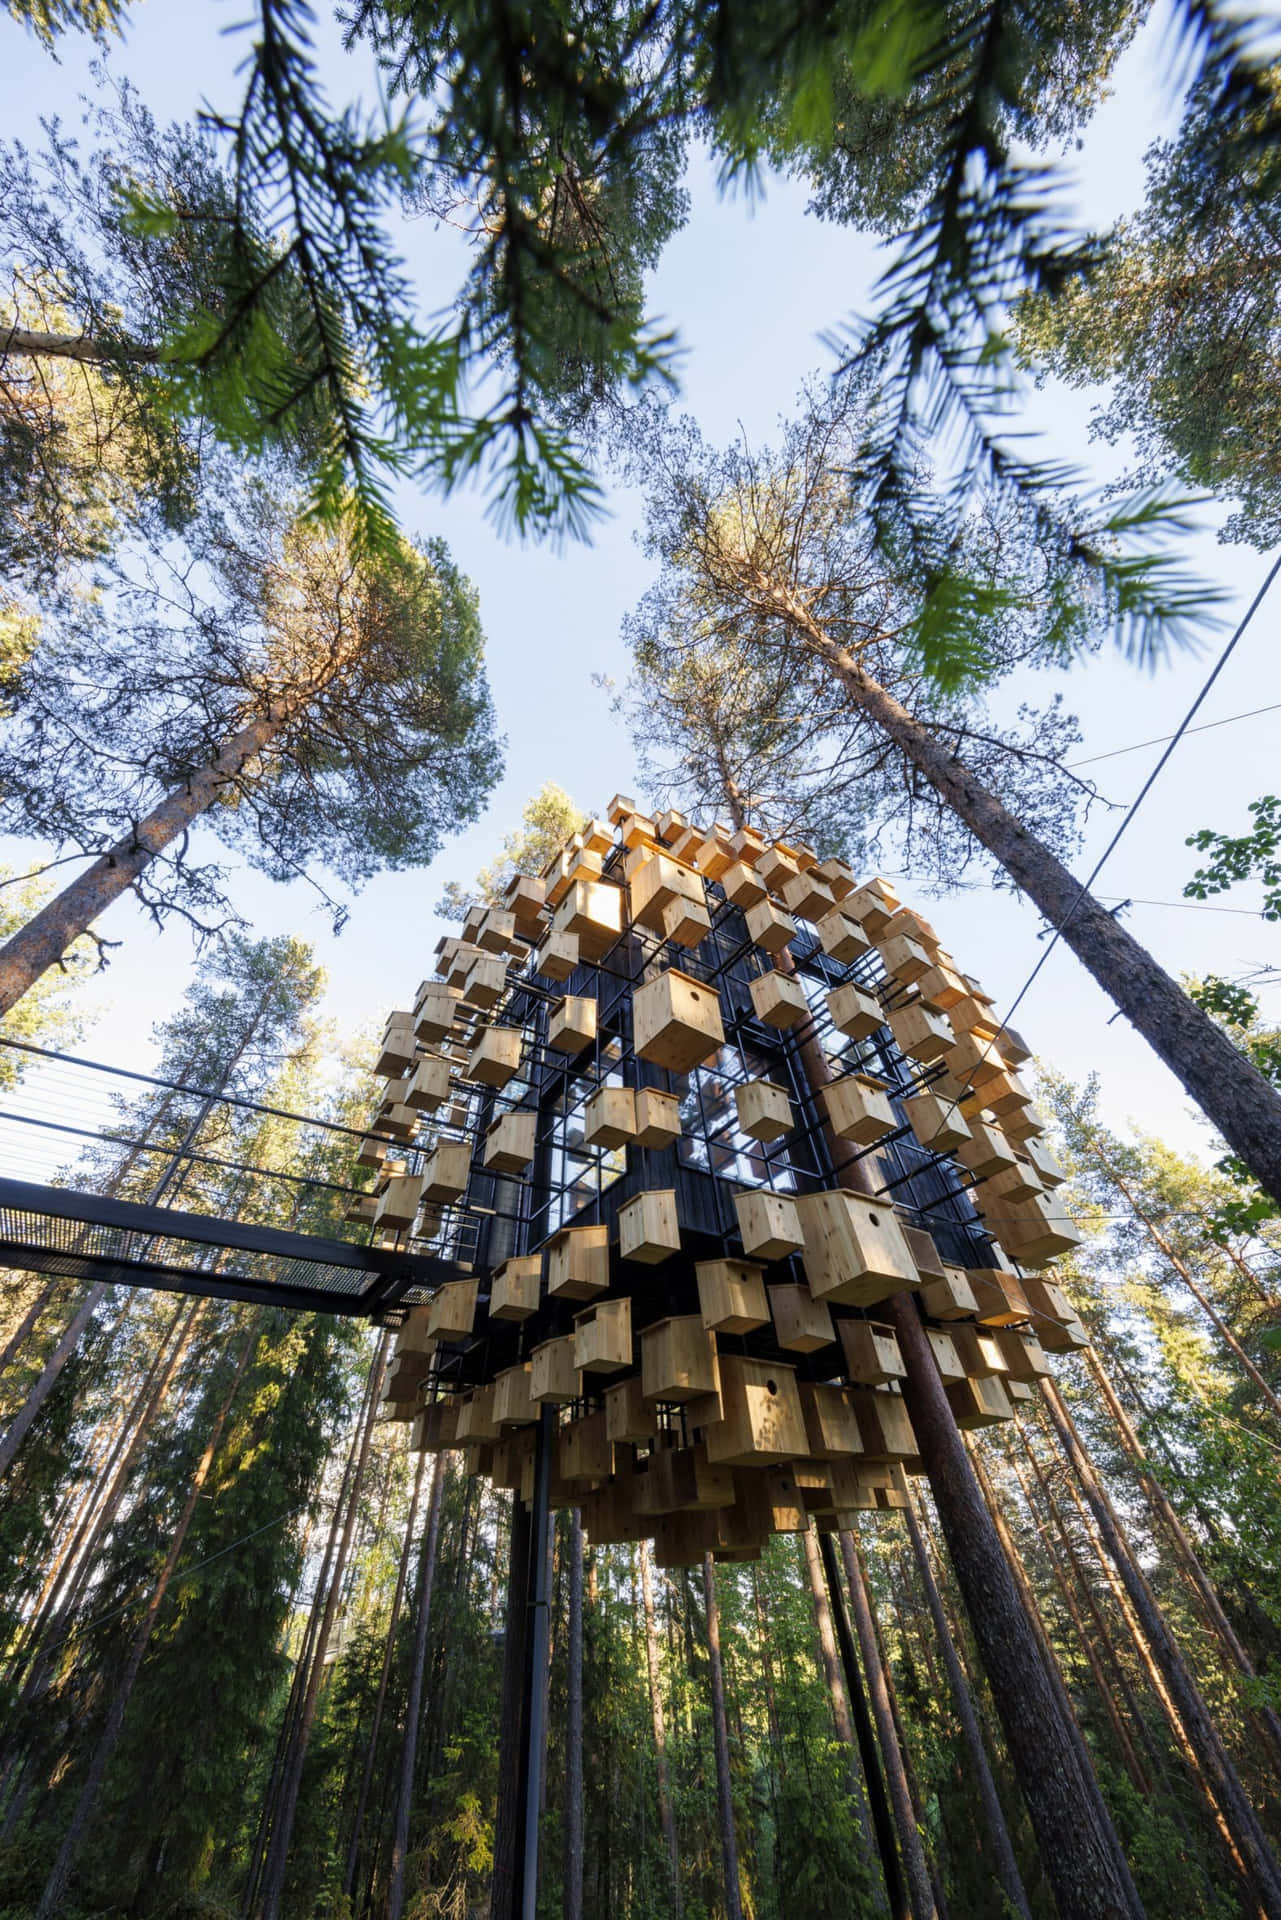 A Tree House Made Of Wooden Blocks In The Forest